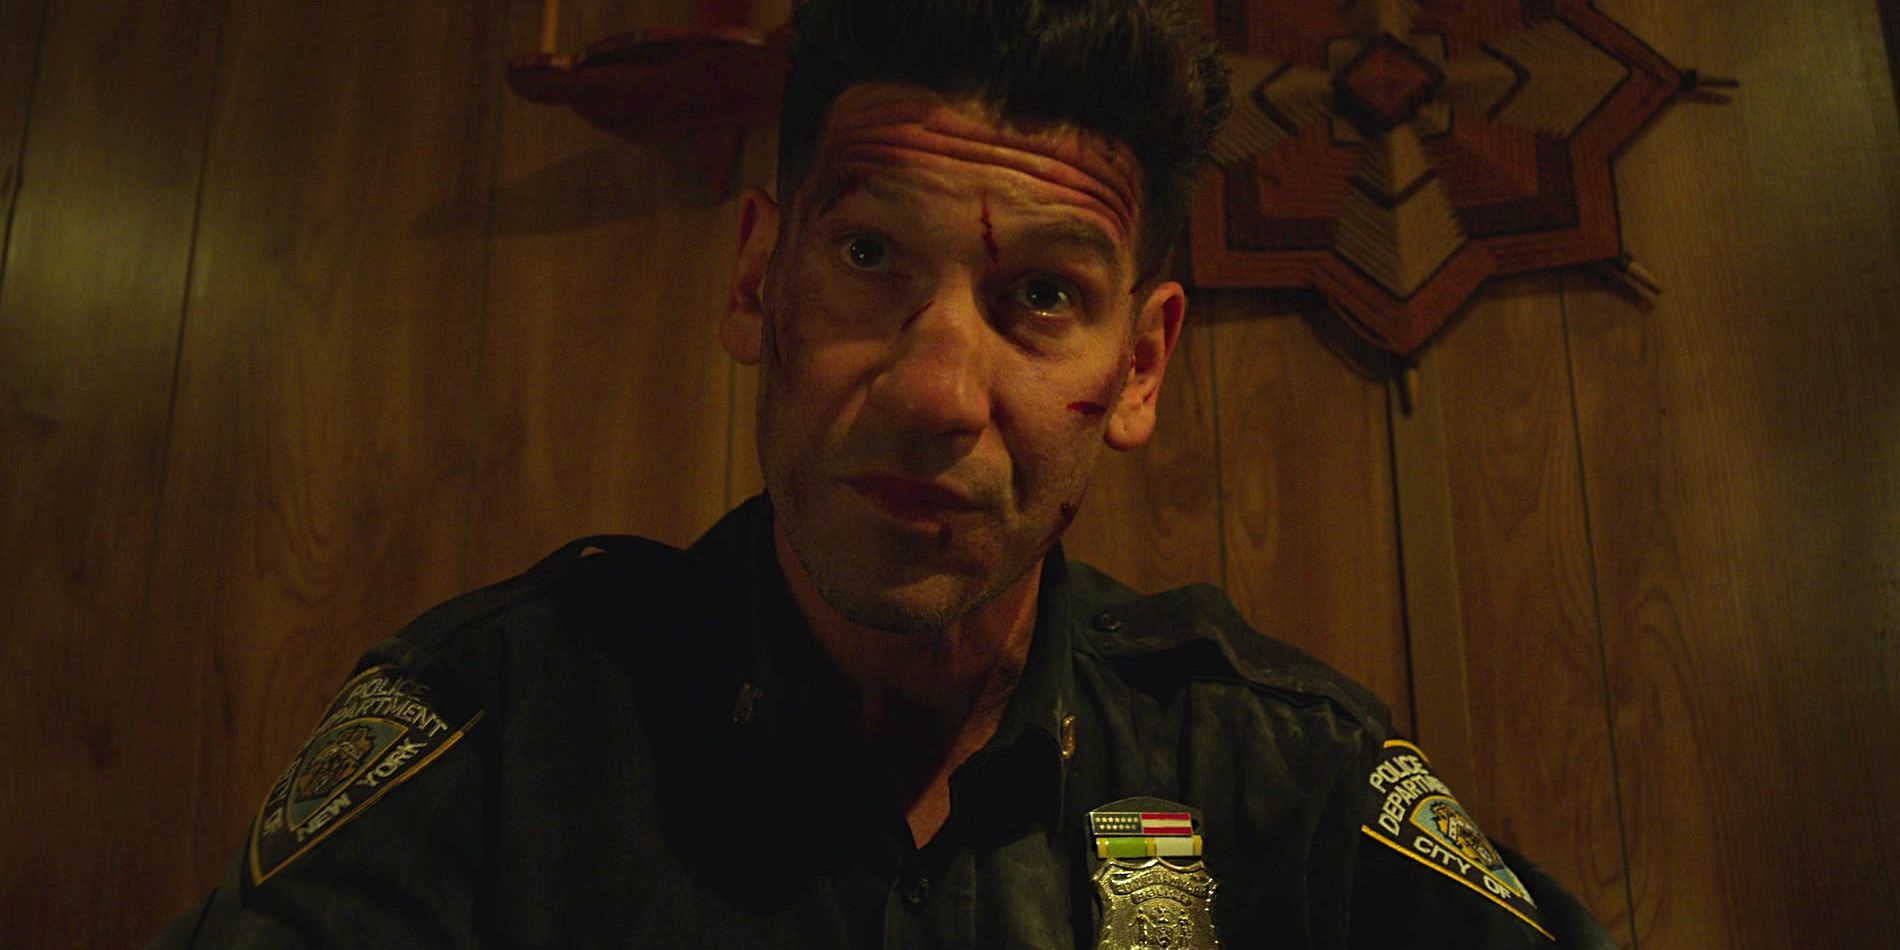 Jon Bernthal's Punisher bloody and bruised in a cop uniform in The Punisher season 2 finale